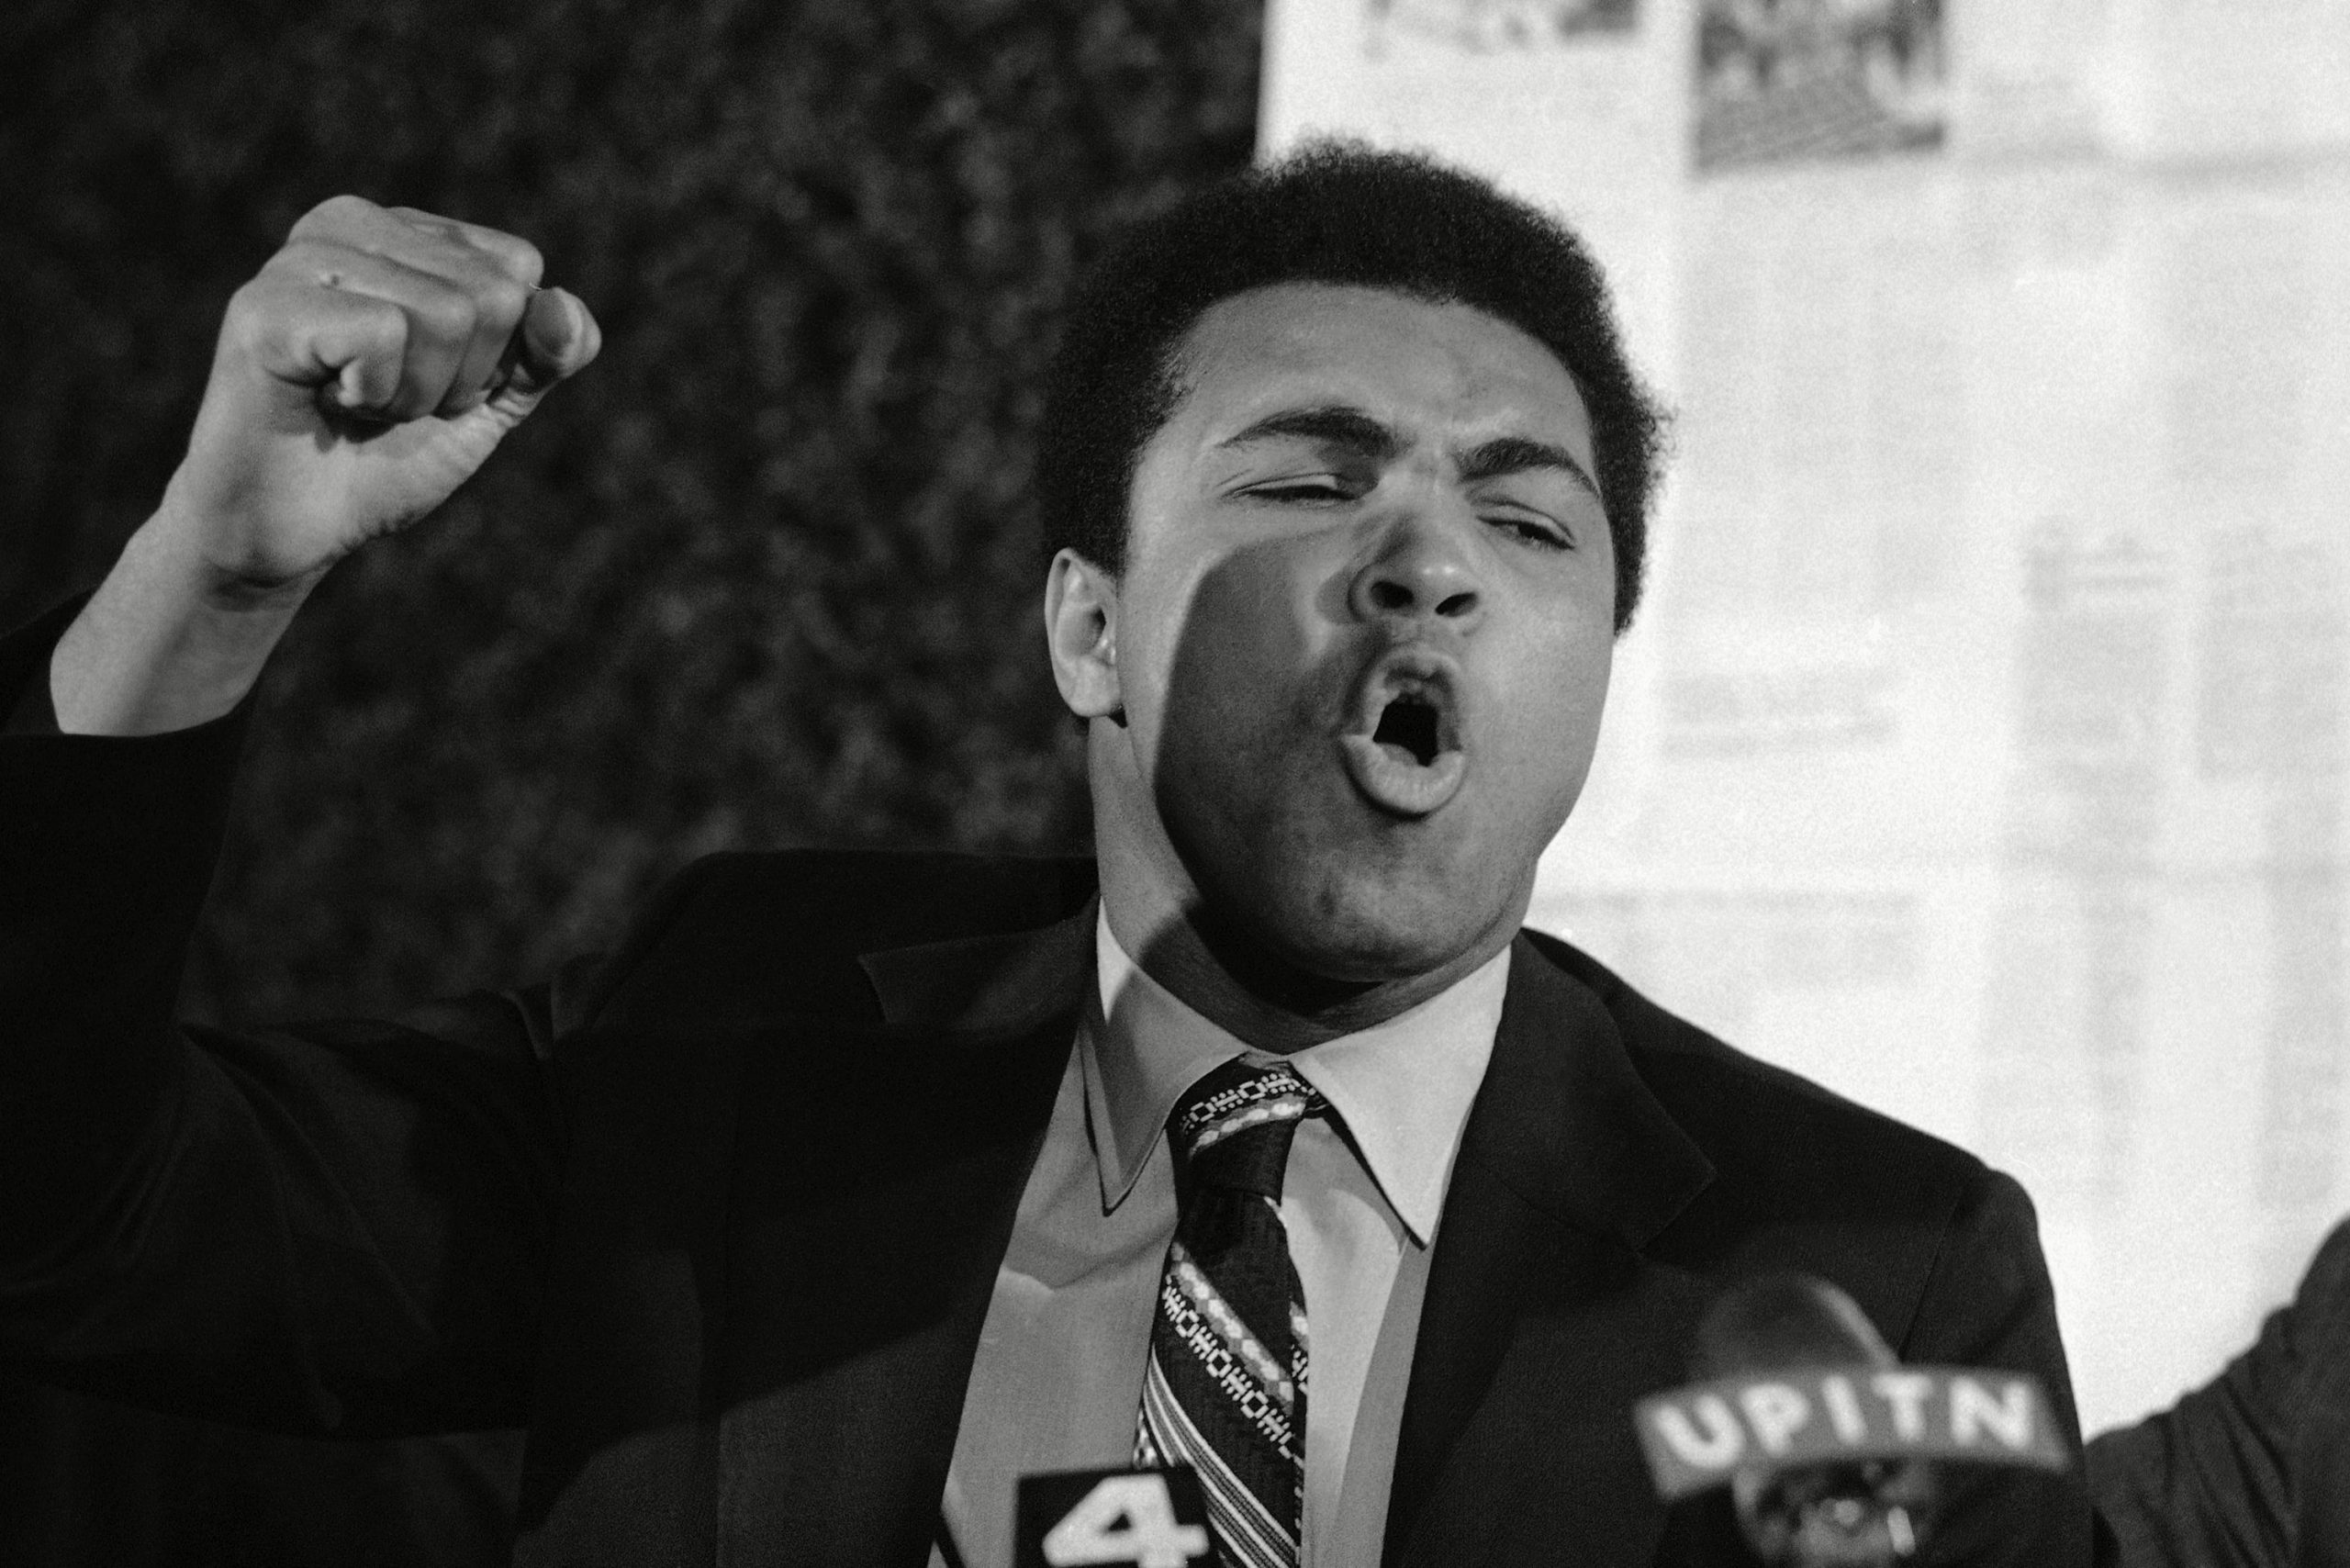 Muhammad Ali speaking at a news conference